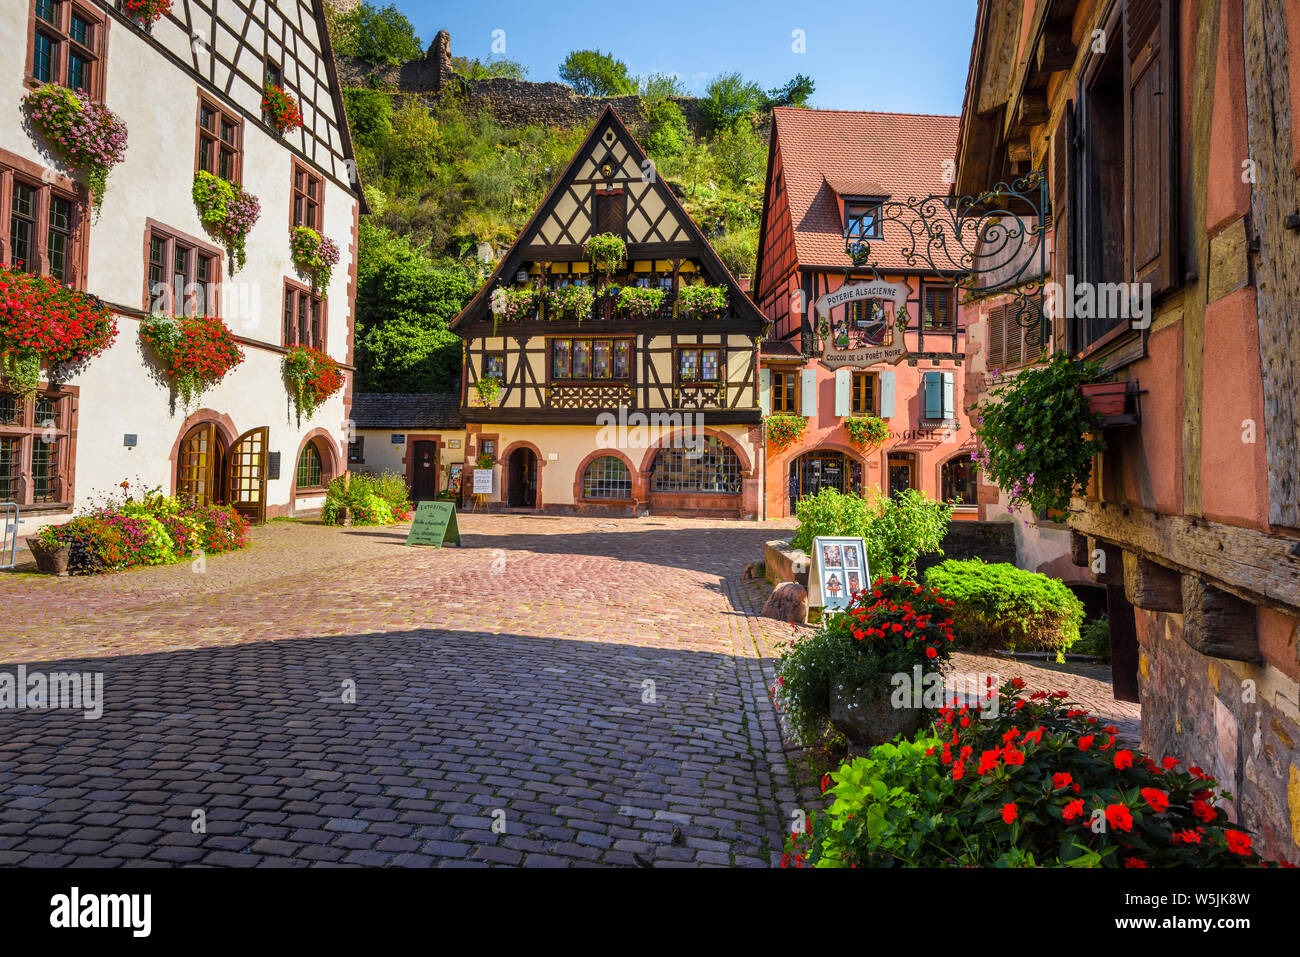 picturesque square with half-timbered houses in the historical old town of Kaysersberg, Alsace, Wine Route, France, popular touristy destination Stock Photo